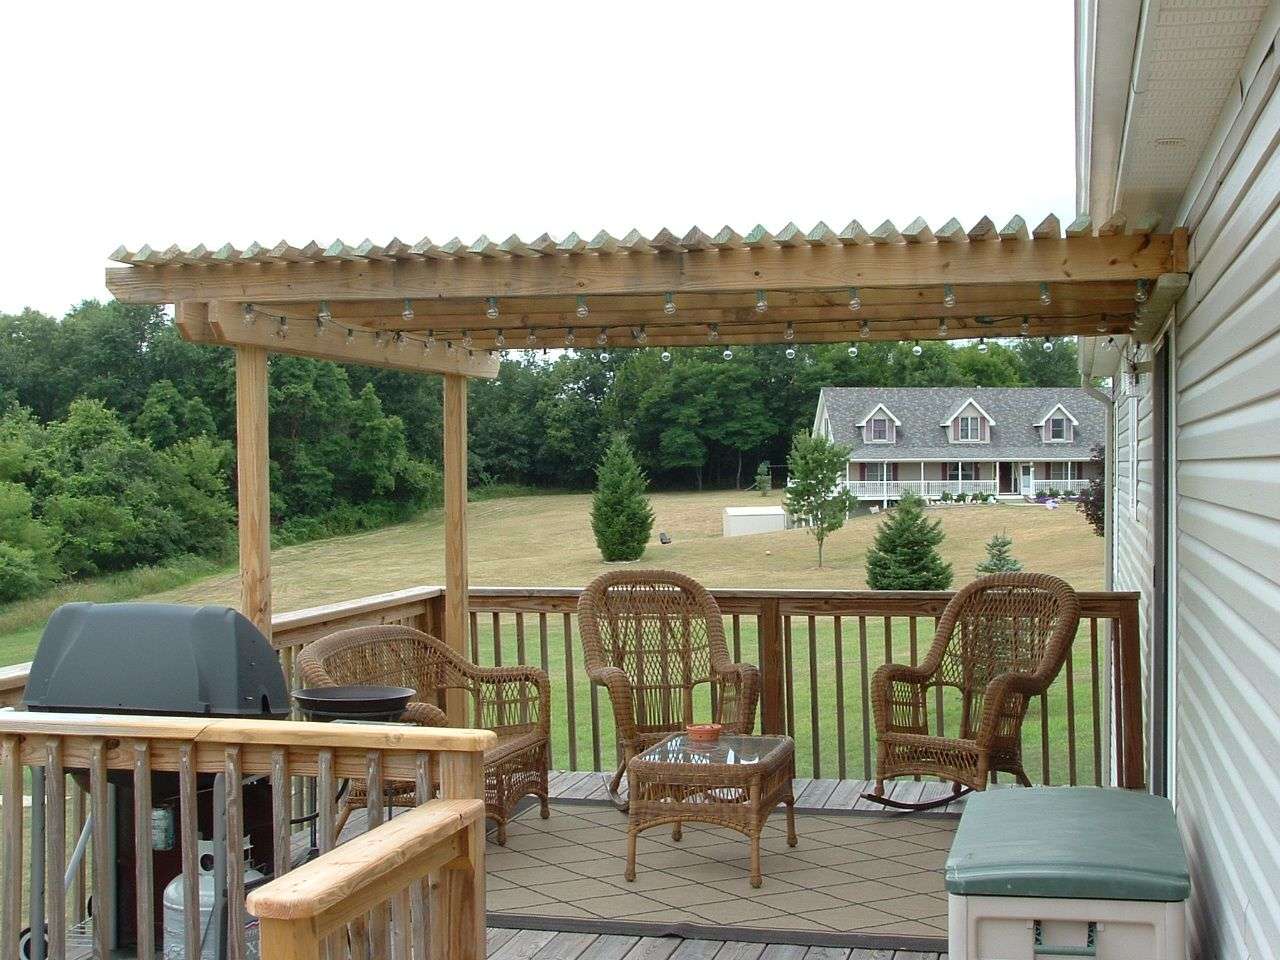 pergola added to existing deck